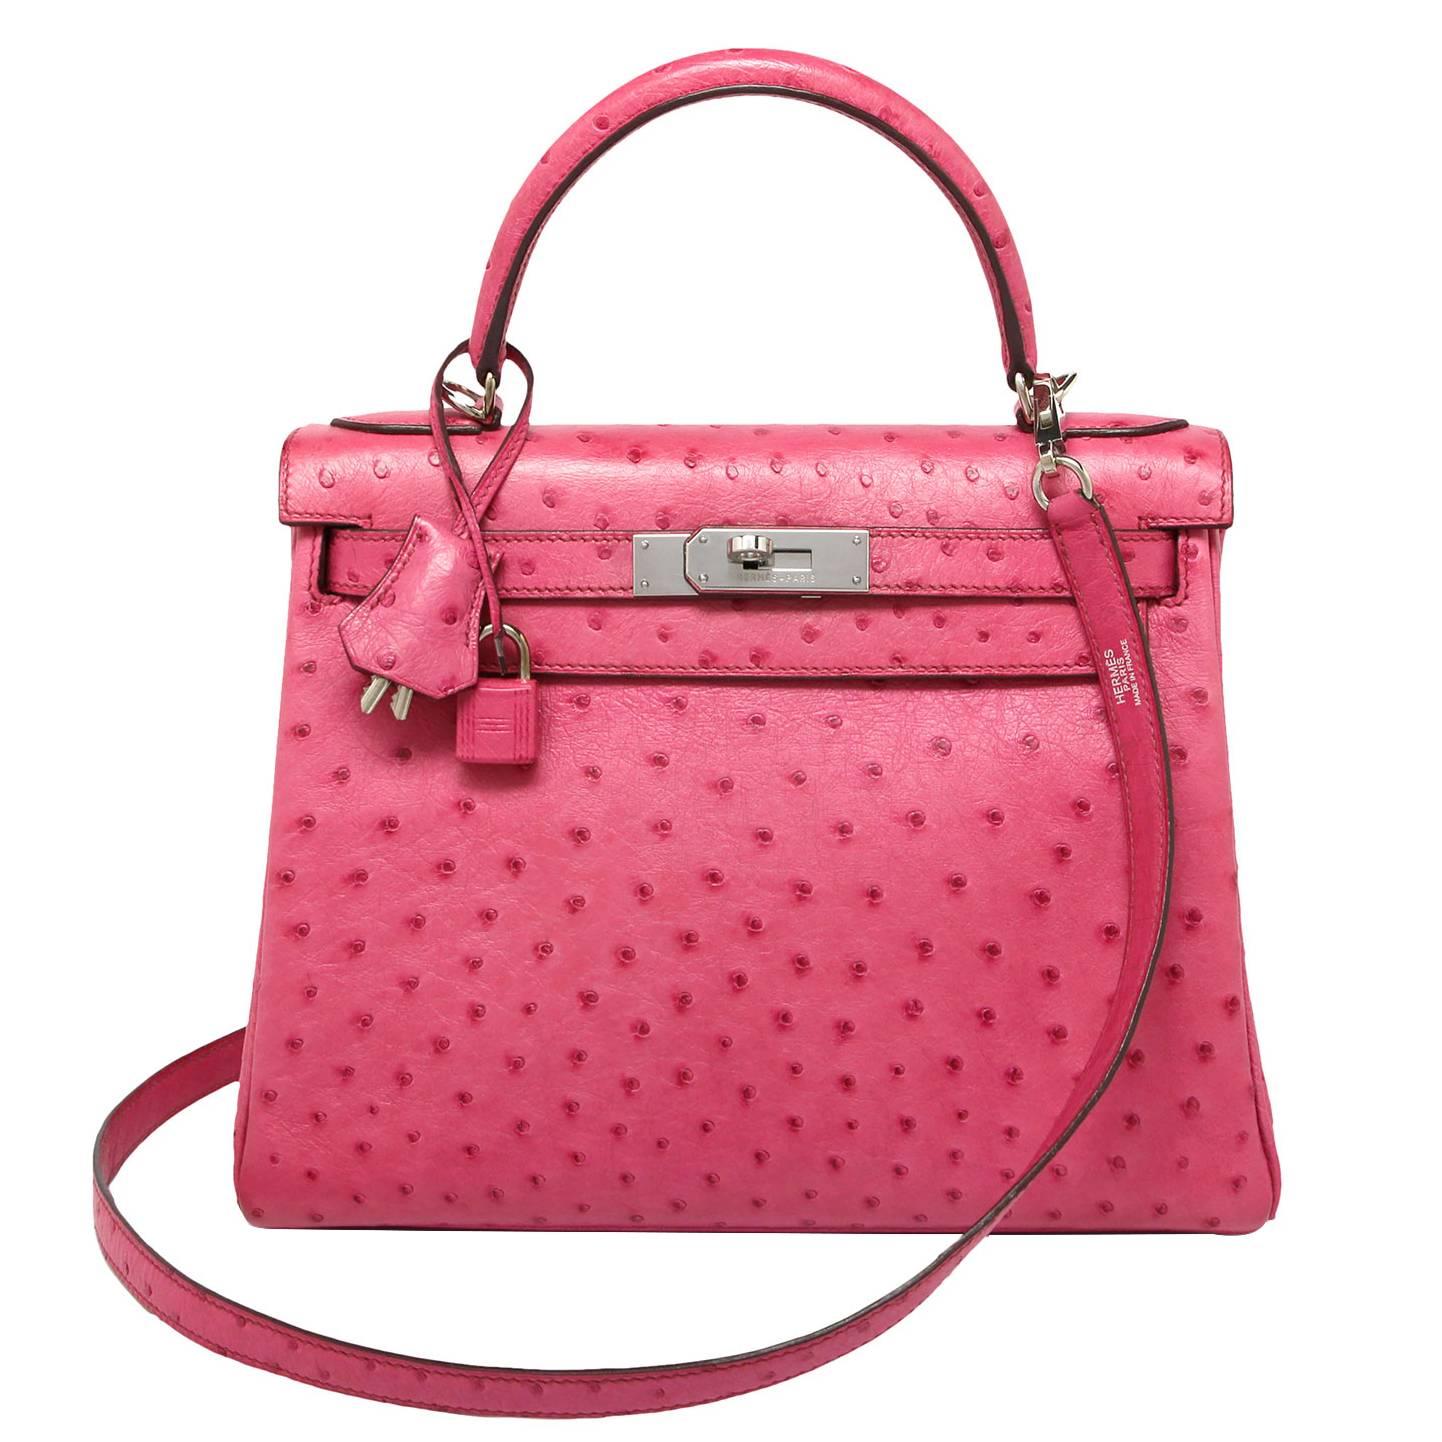 Hermes Kelly retourne fuchsia
Ostrich
Palladium hardware 
Stamp: I Square 2001
Comes with Hermes cloth bag, strap, clochette, lock & keys.

This colour is currently discontinued in ostrich so makes it a rare piece.